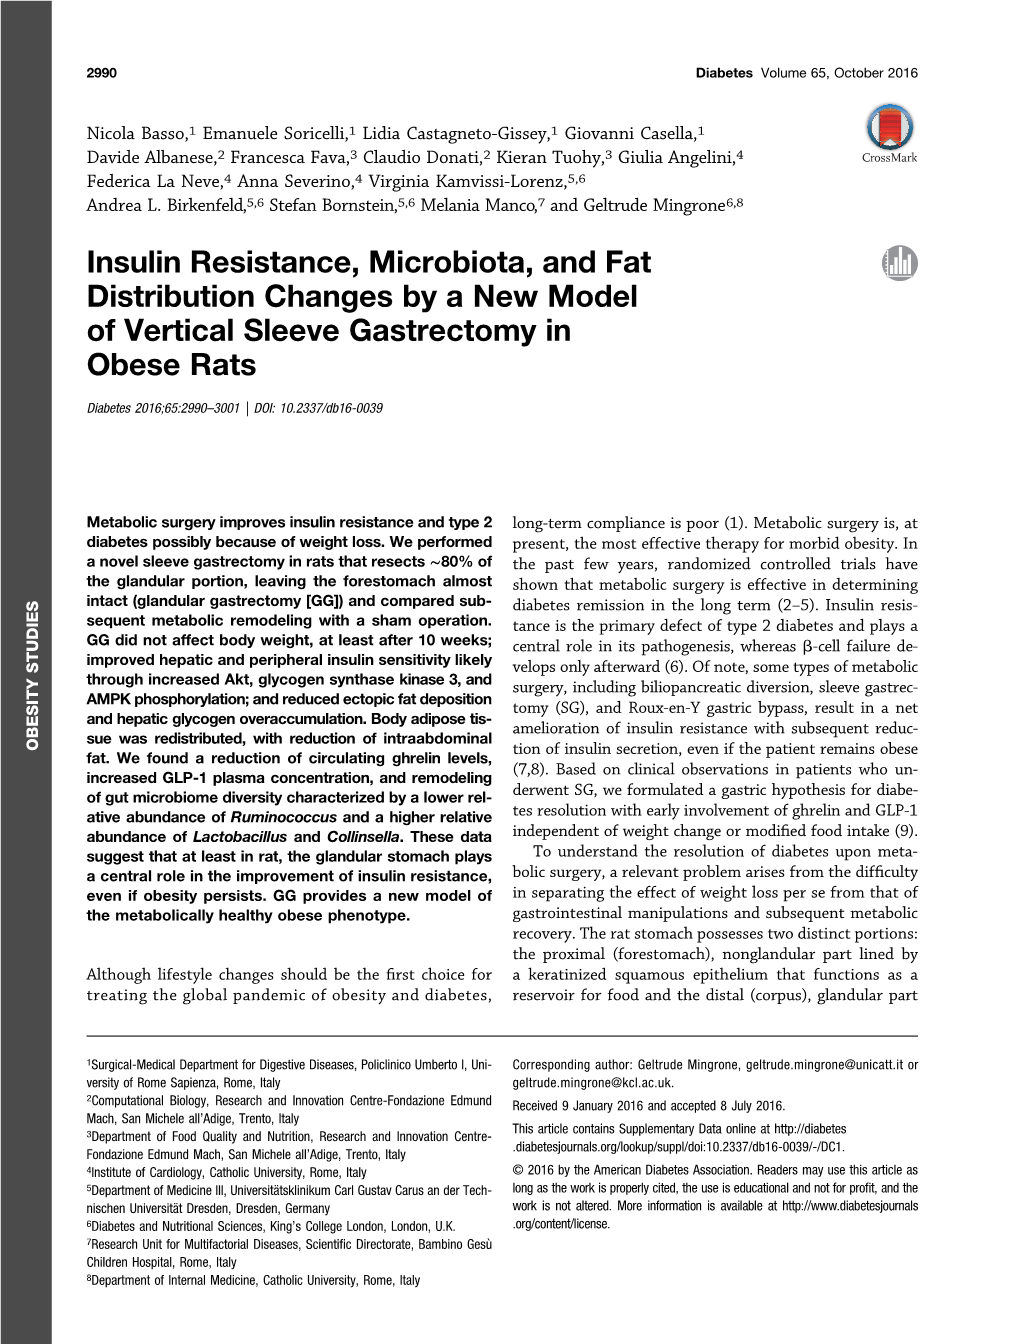 Insulin Resistance, Microbiota, and Fat Distribution Changes by a New Model of Vertical Sleeve Gastrectomy in Obese Rats